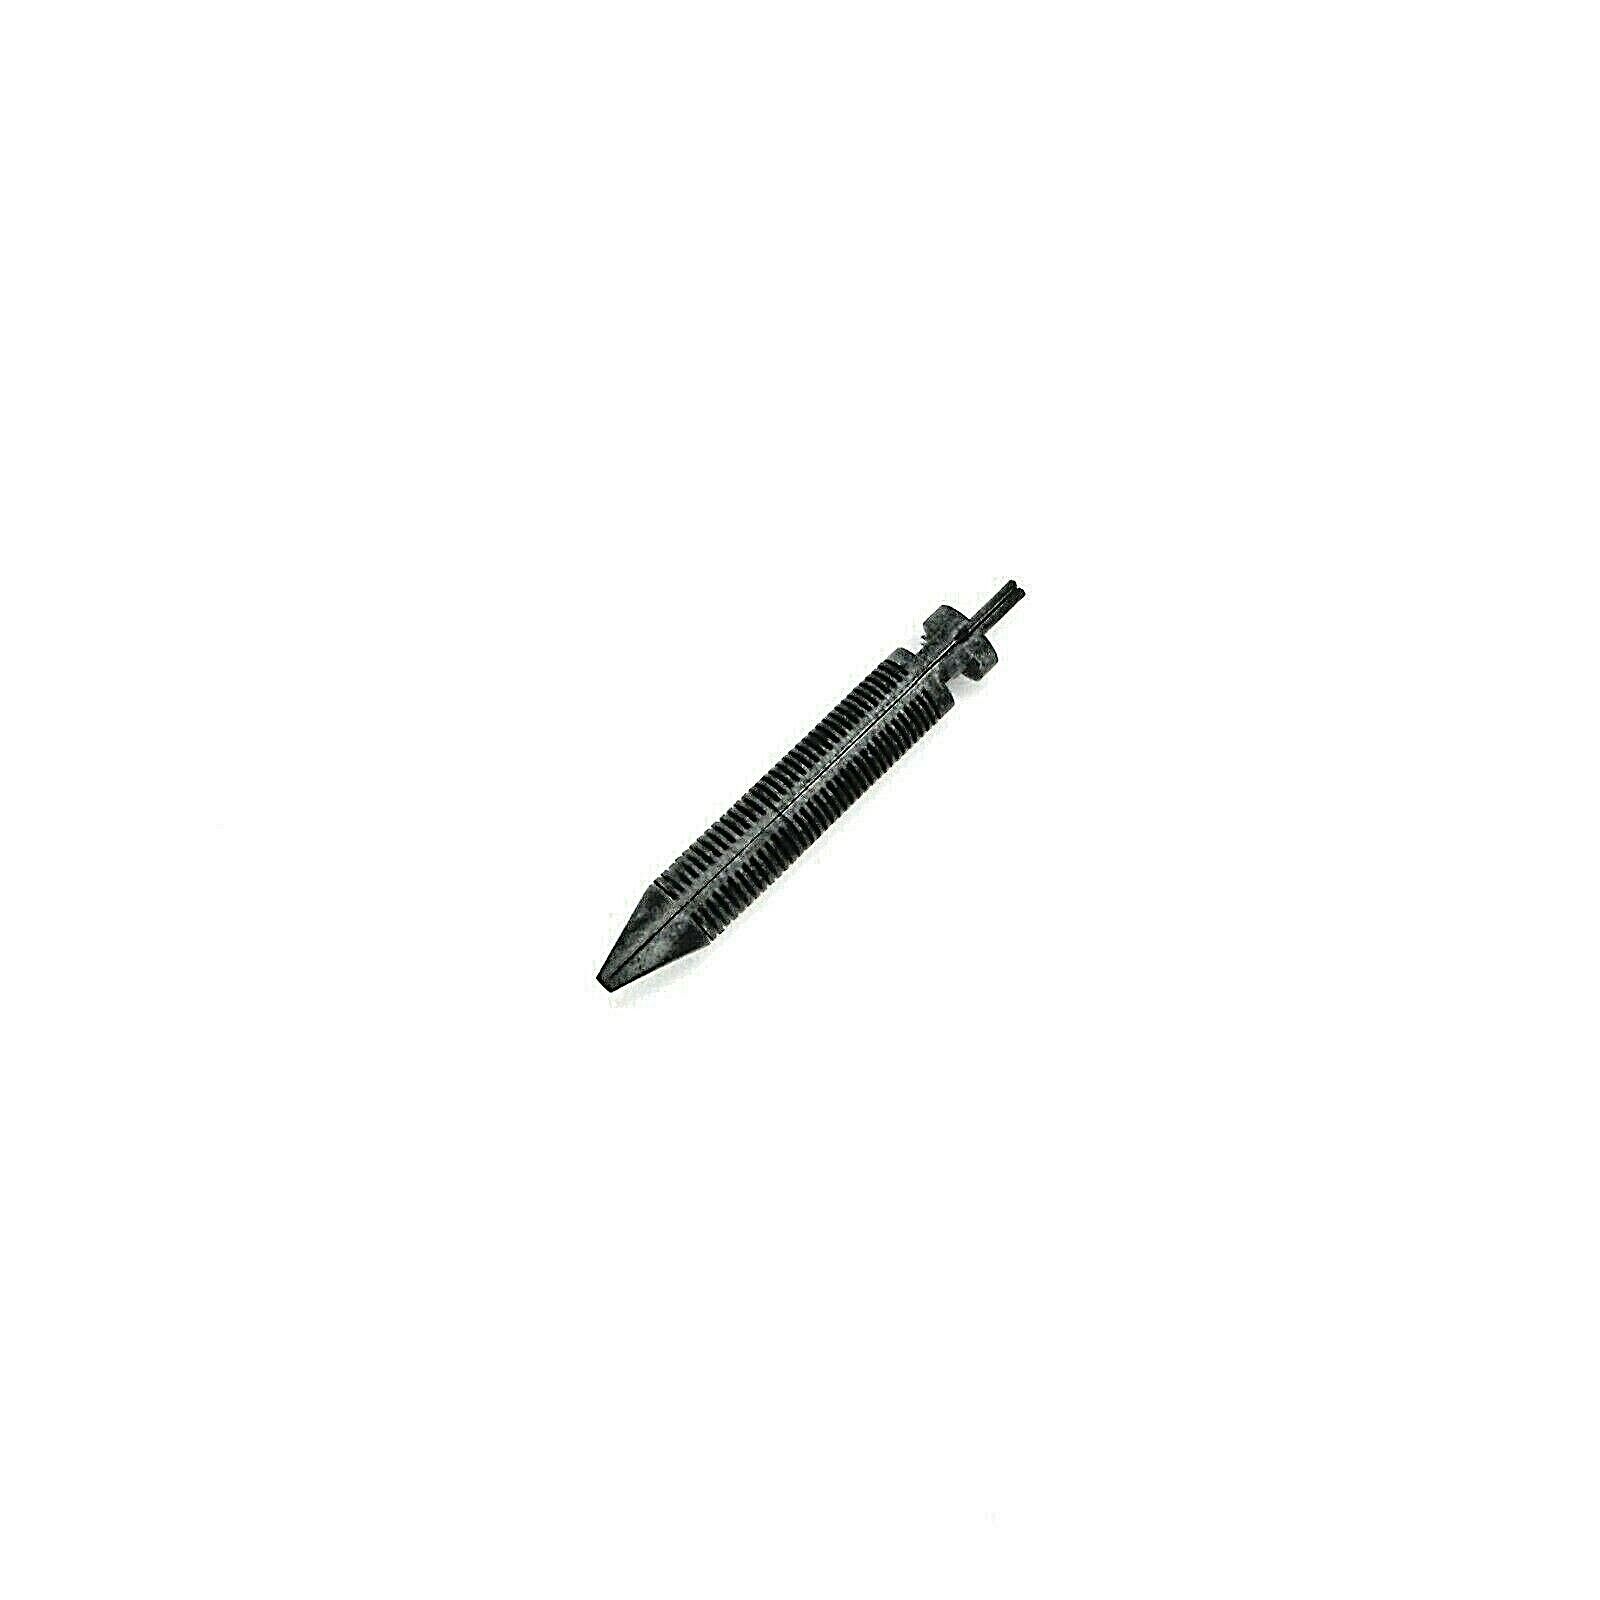 Size #6 Replacement Feed: Fits Size #6 Fountain Pen Nibs. Improves Pens Ink Flow